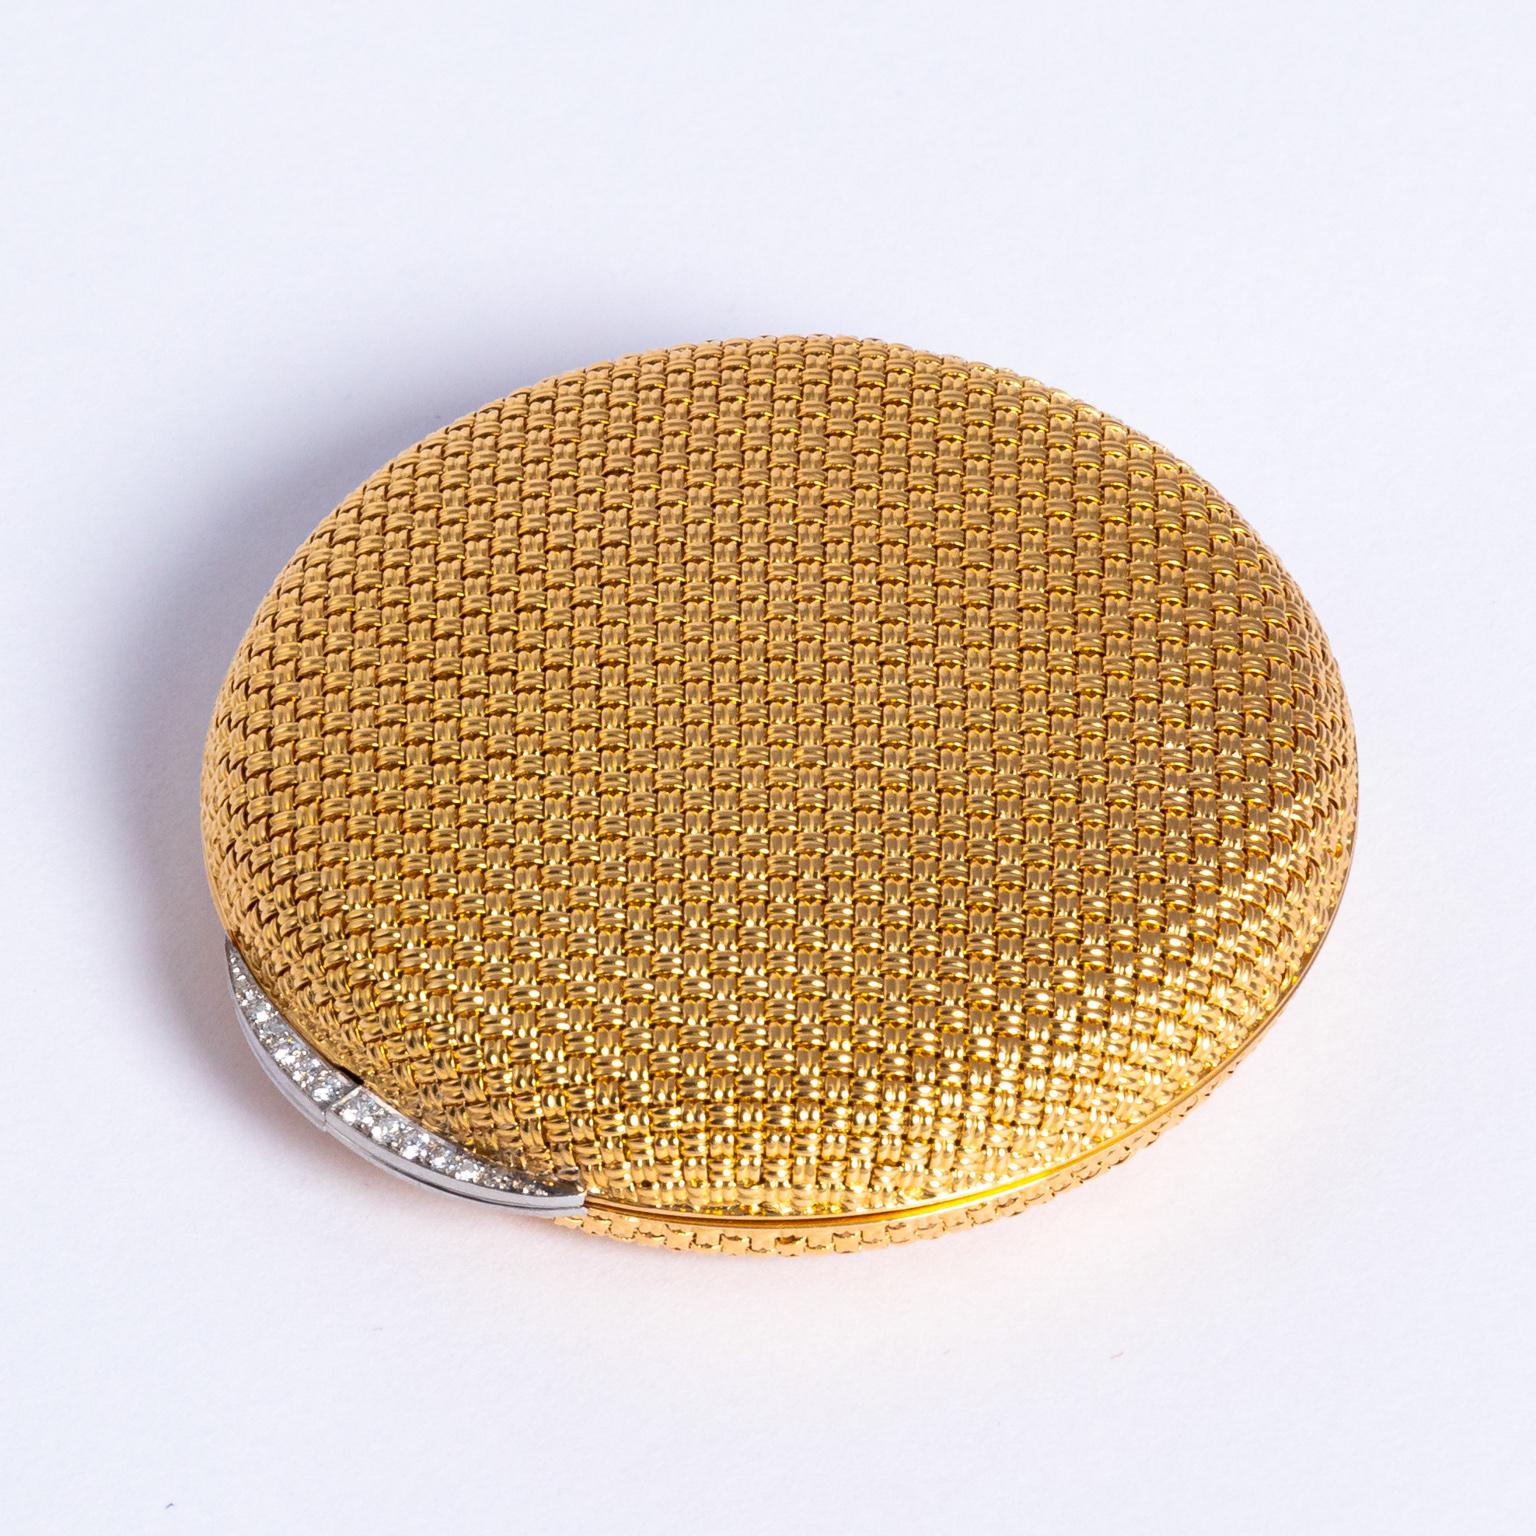 Stunning 1950s 18-karat yellow gold and diamond compact, round shape, with a woven design and a crescent diamond set thumb-piece. Stamped 18K in a shield like mark on the inner ring of the compact, Signed Van Cleef ET Arpels, made in France with a